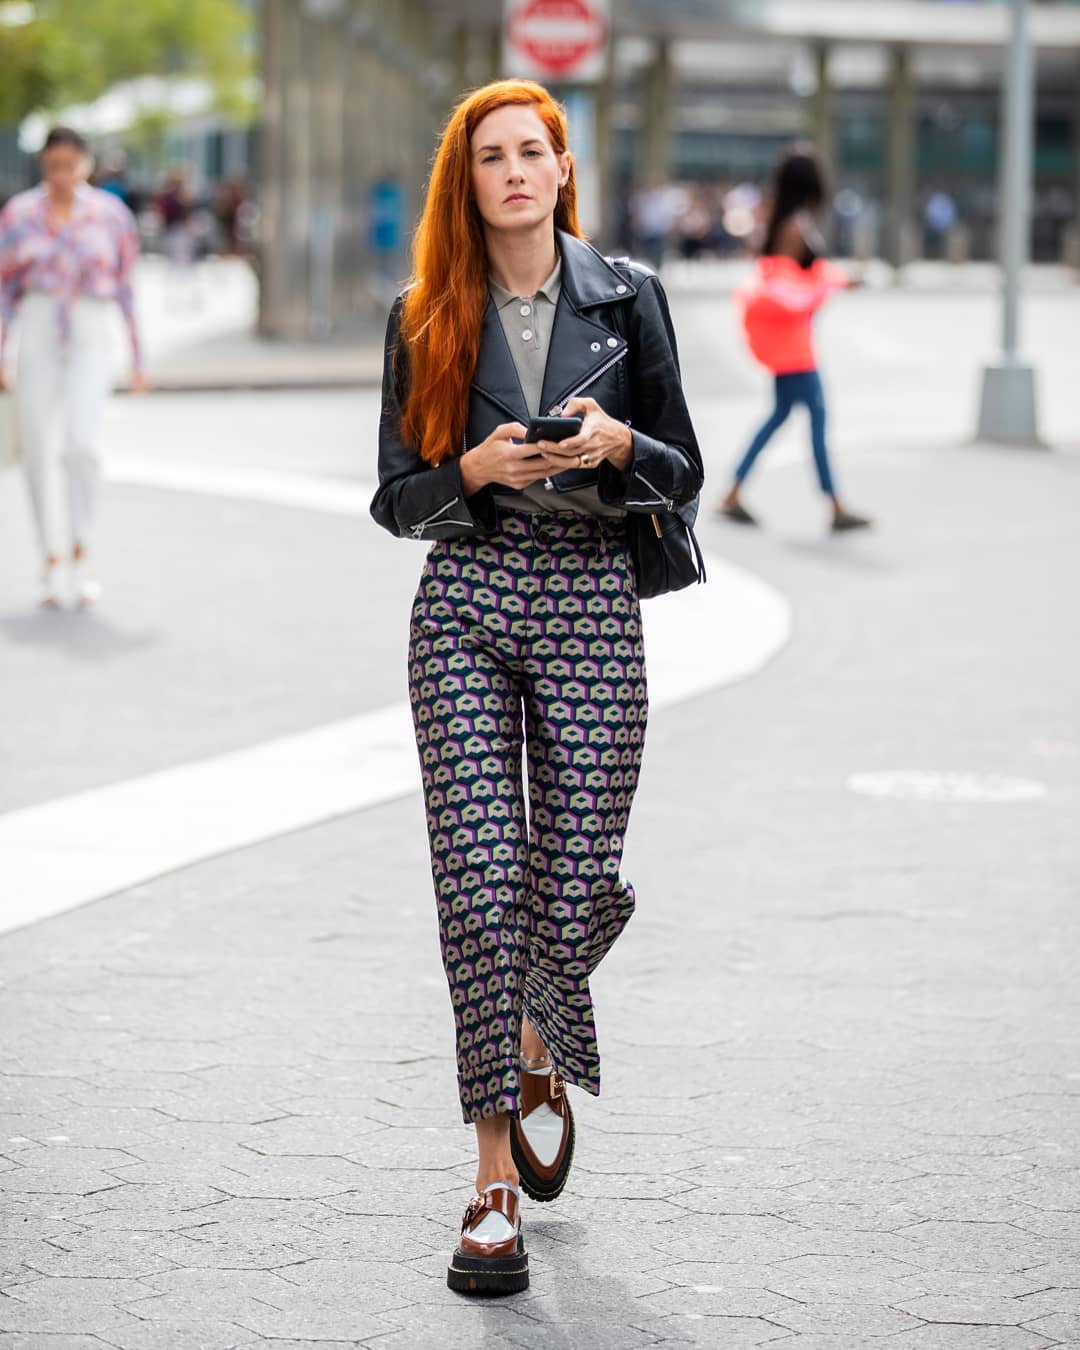 Printed Pants Are the Perfect Statement Piece for Fall